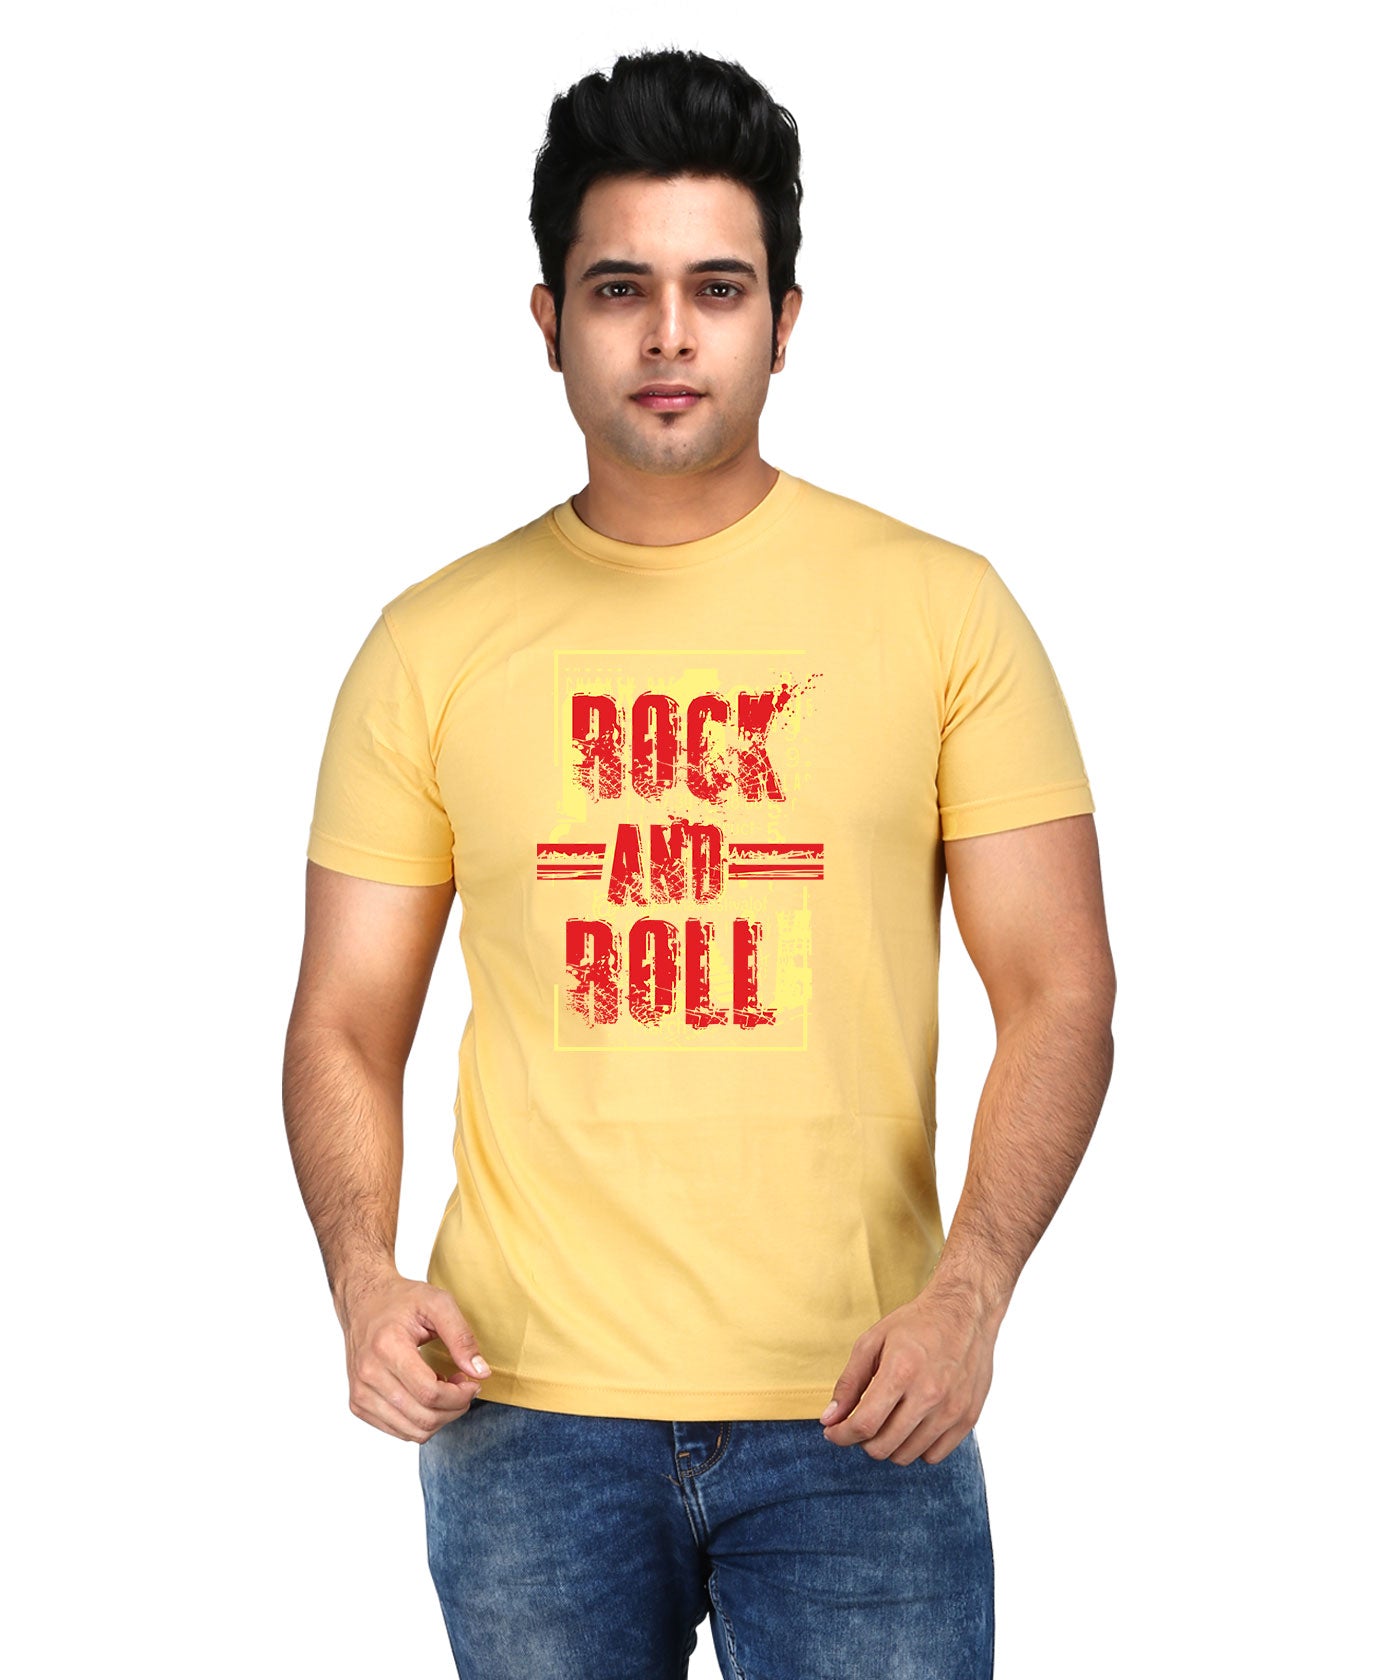 Rock And Roll - Premium Round Neck Cotton Tees for Men - Golden Yellow